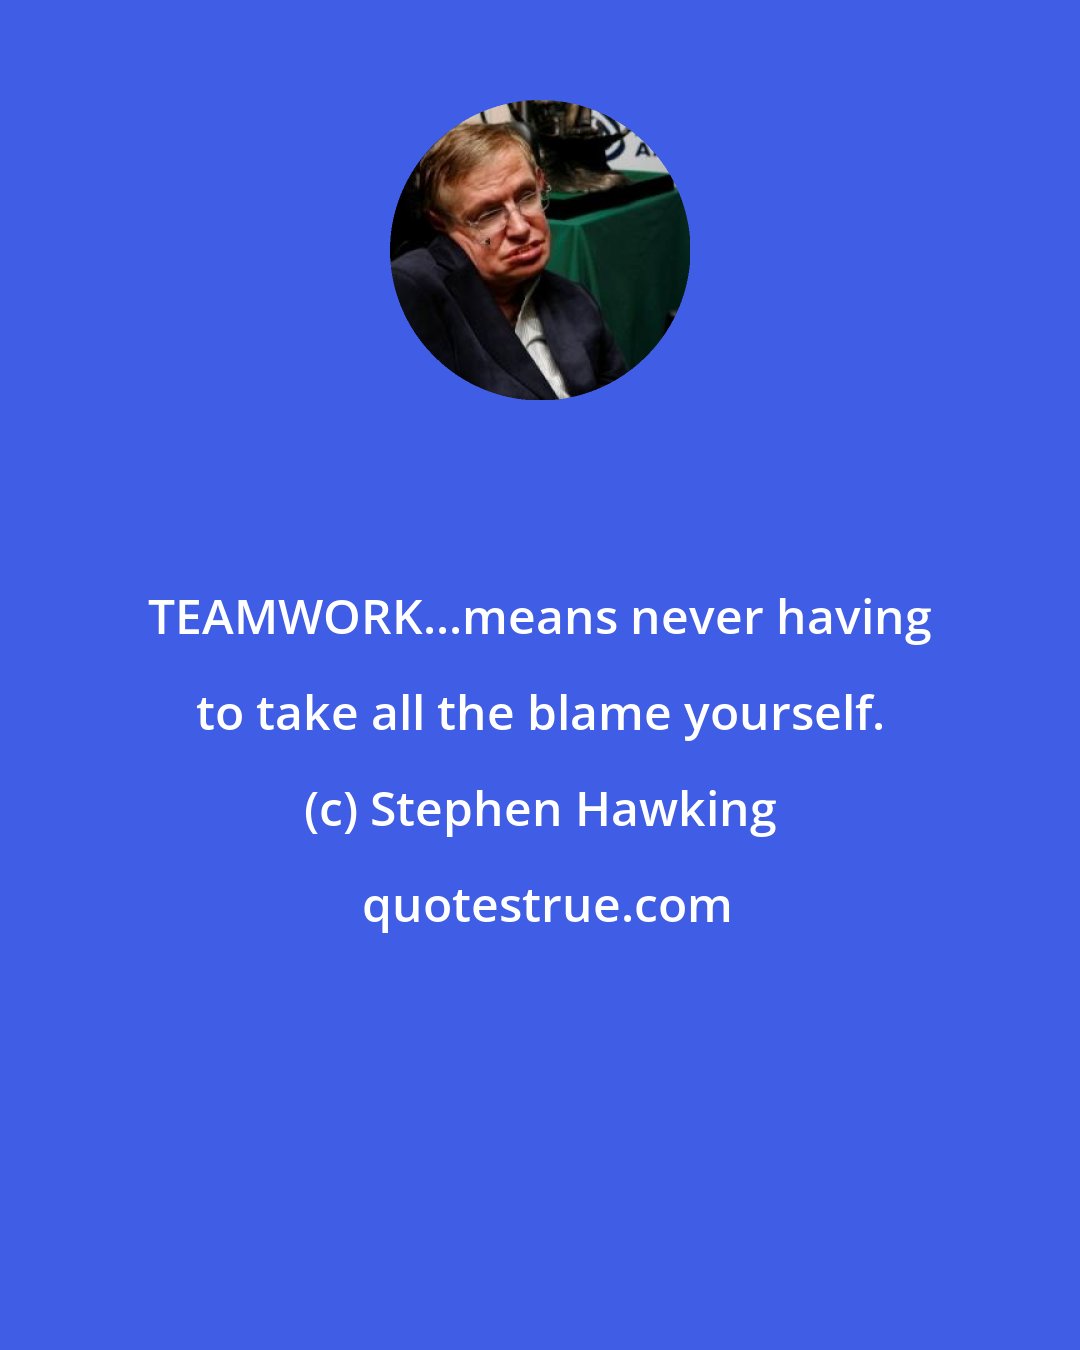 Stephen Hawking: TEAMWORK...means never having to take all the blame yourself.